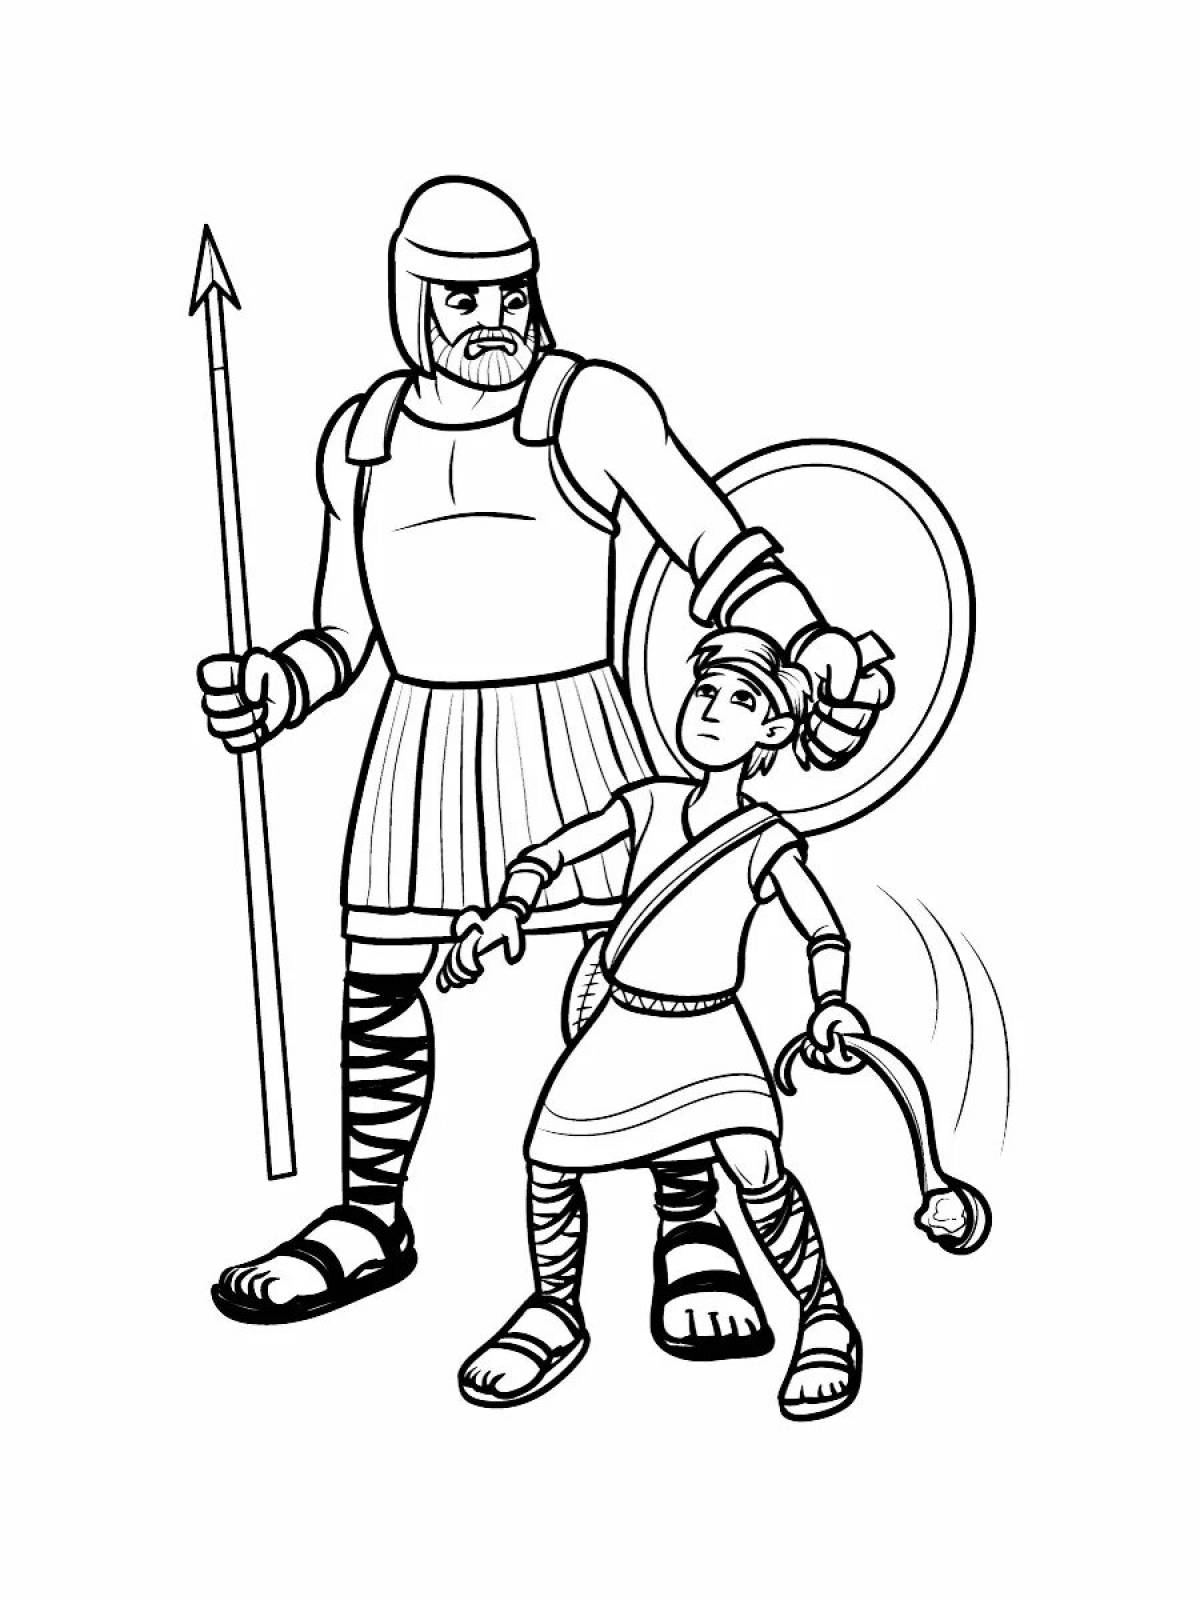 Adorable david and goliath coloring page